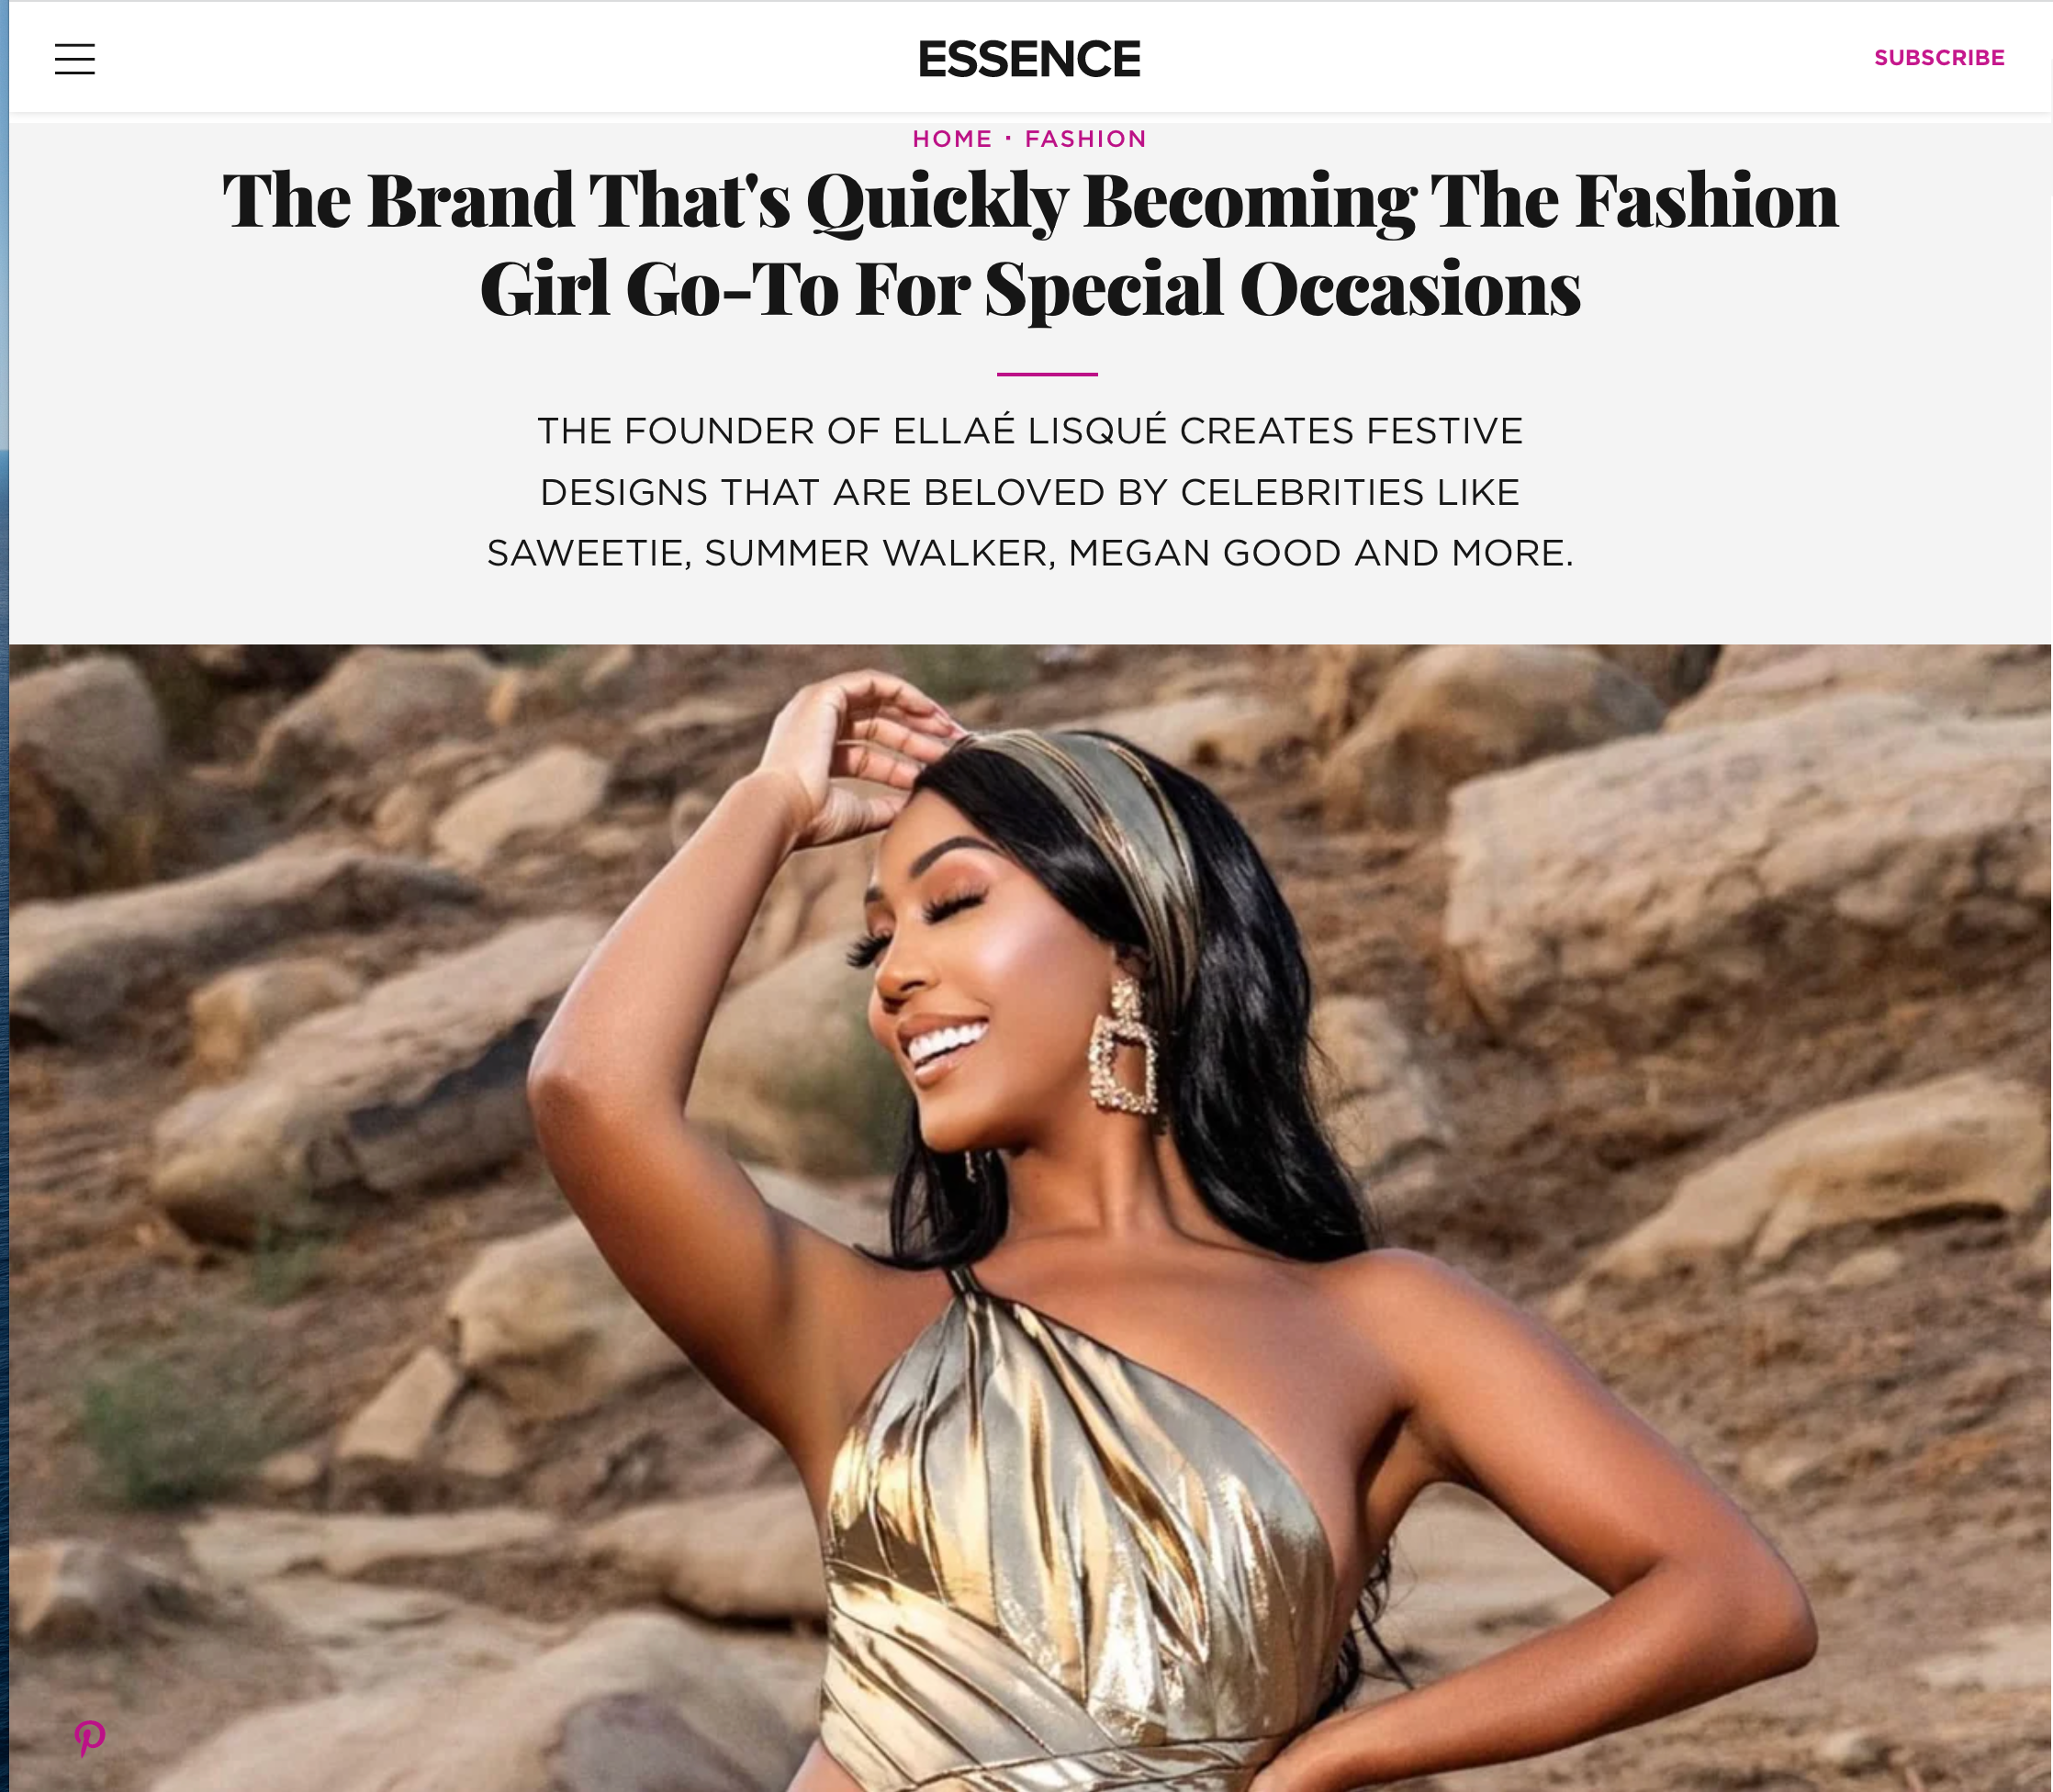 [Essence Magazine] The Brand That's Quickly Becoming The Fashion Girl Go-To For Special Occasions